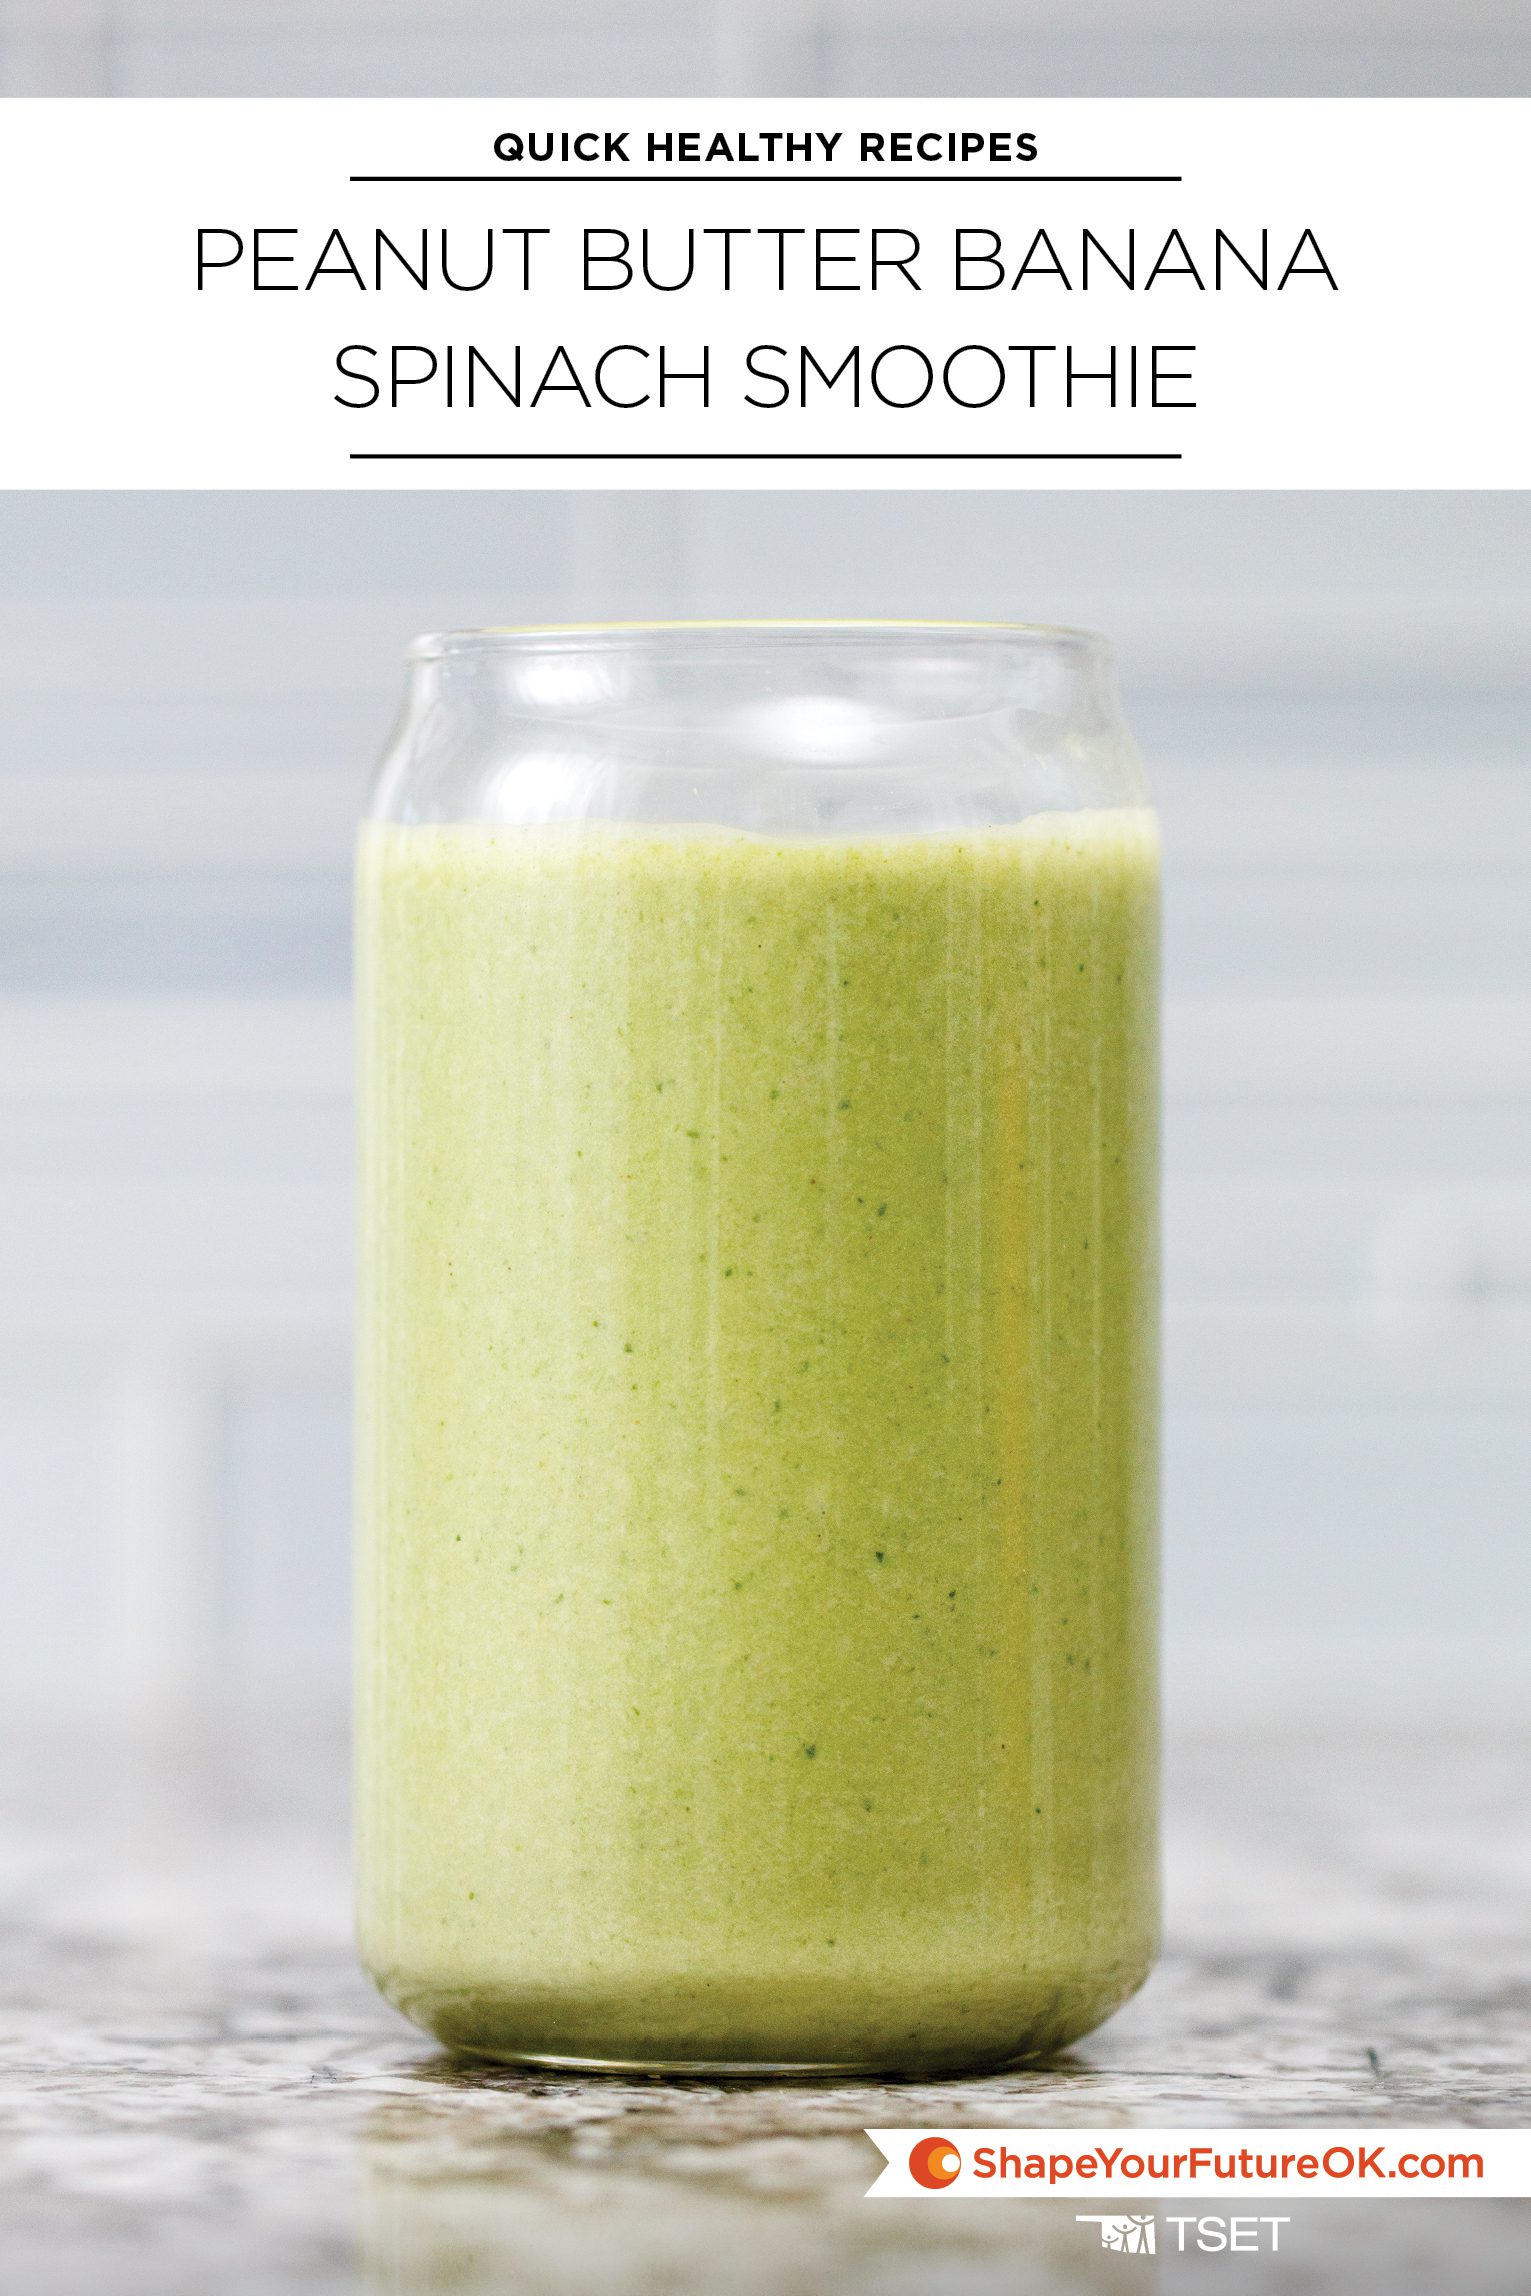 Peanut butter banana spinach smoothie